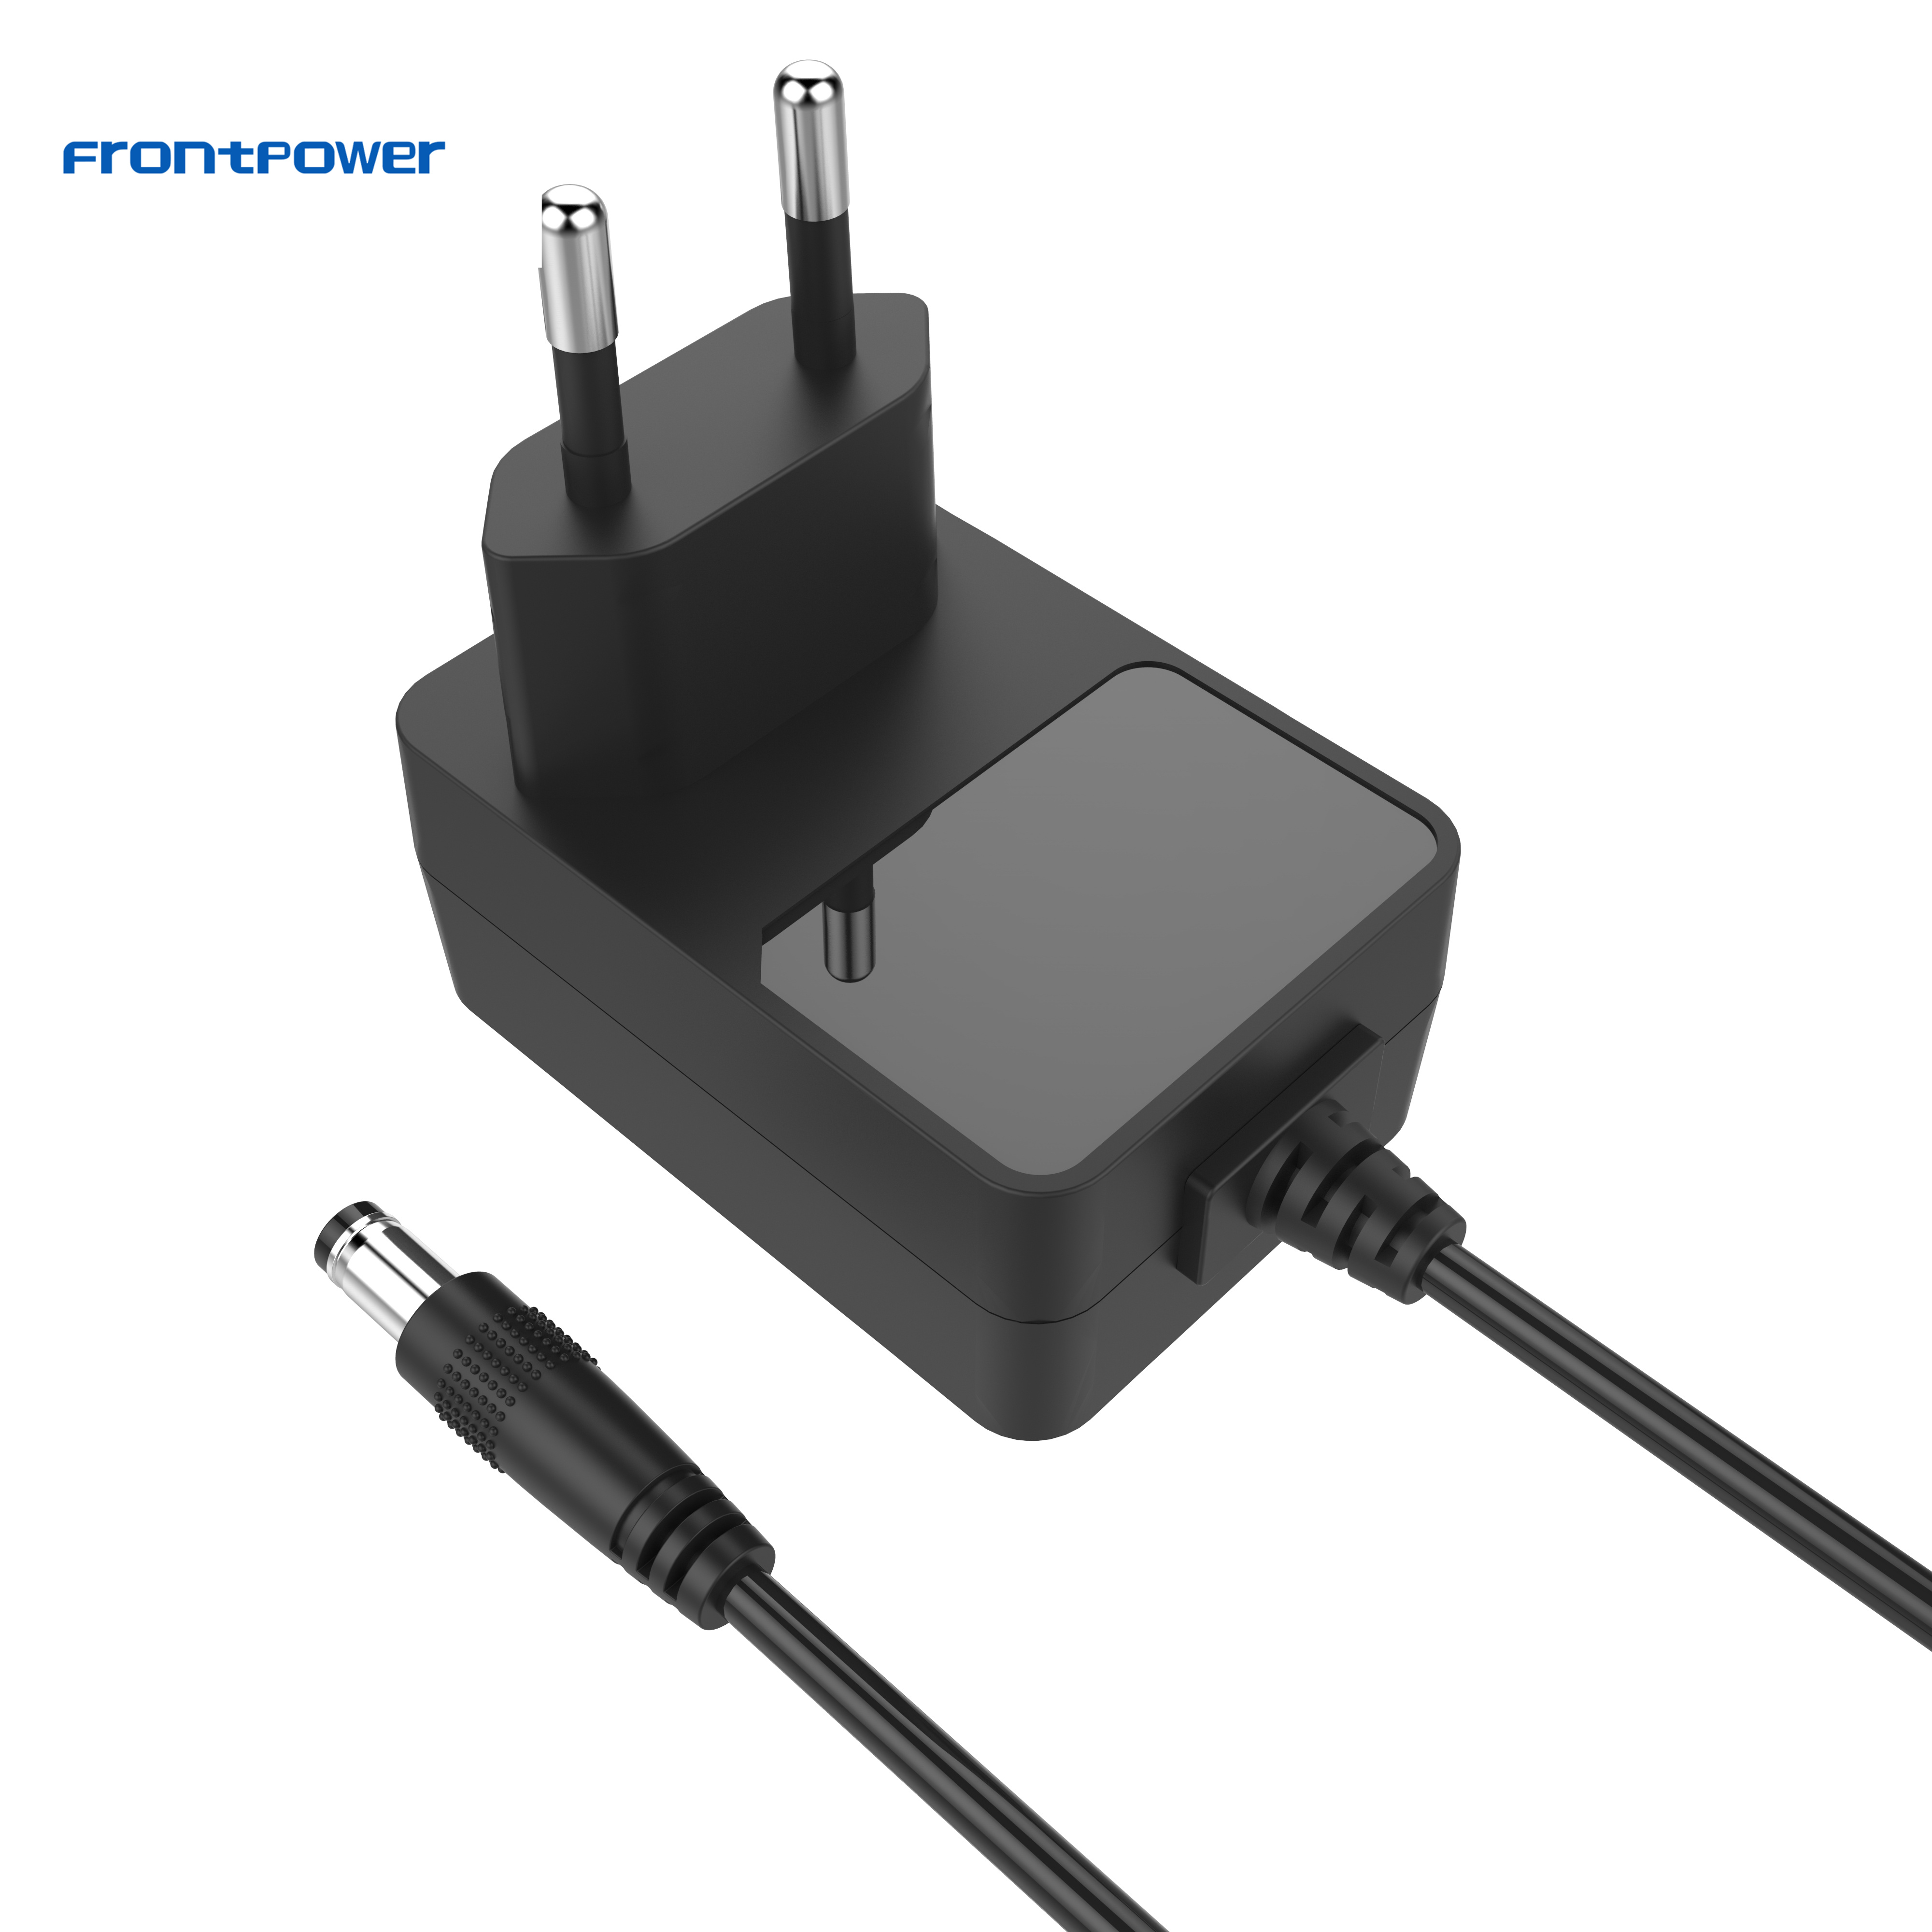 12W 5v 1a 2a 2.4a 2.5a 3a wall plug power adapter with UL CE GS SAA KC FCC PSE CCC approved